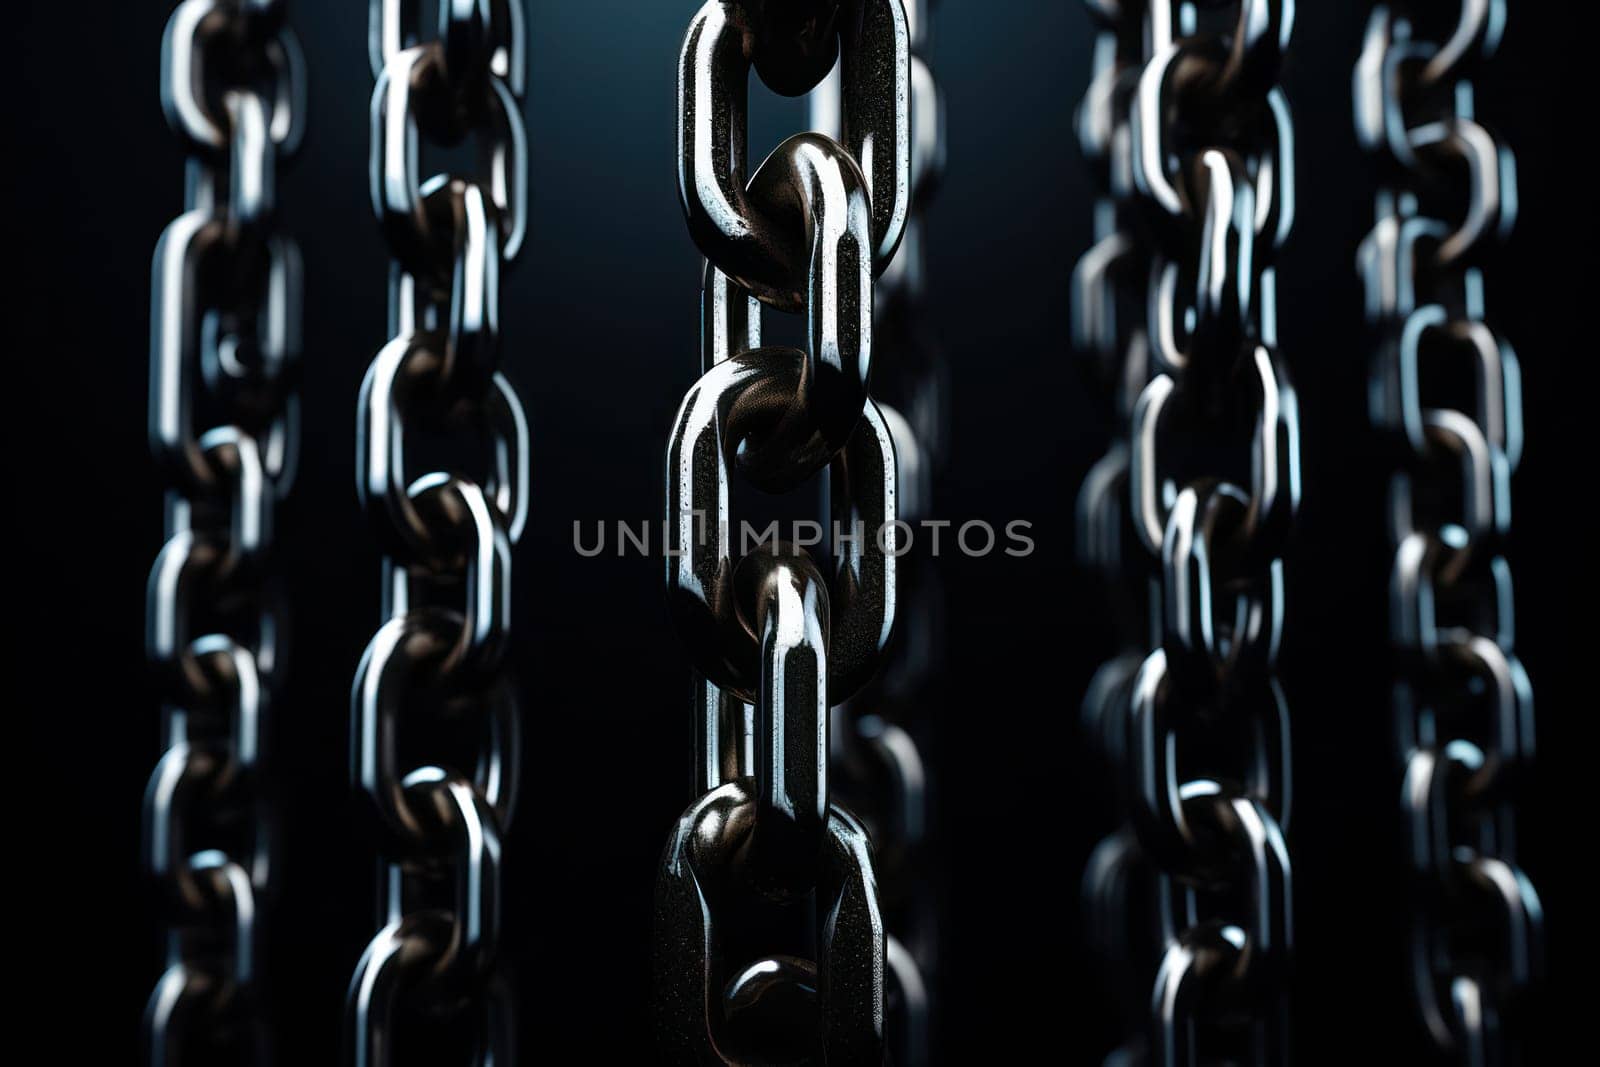 Connected Strength: A Rusty Row of Heavy Metallic Chains, Symbolizing Reliable Teamwork and Power, Against a Dark, Shadowy Wall